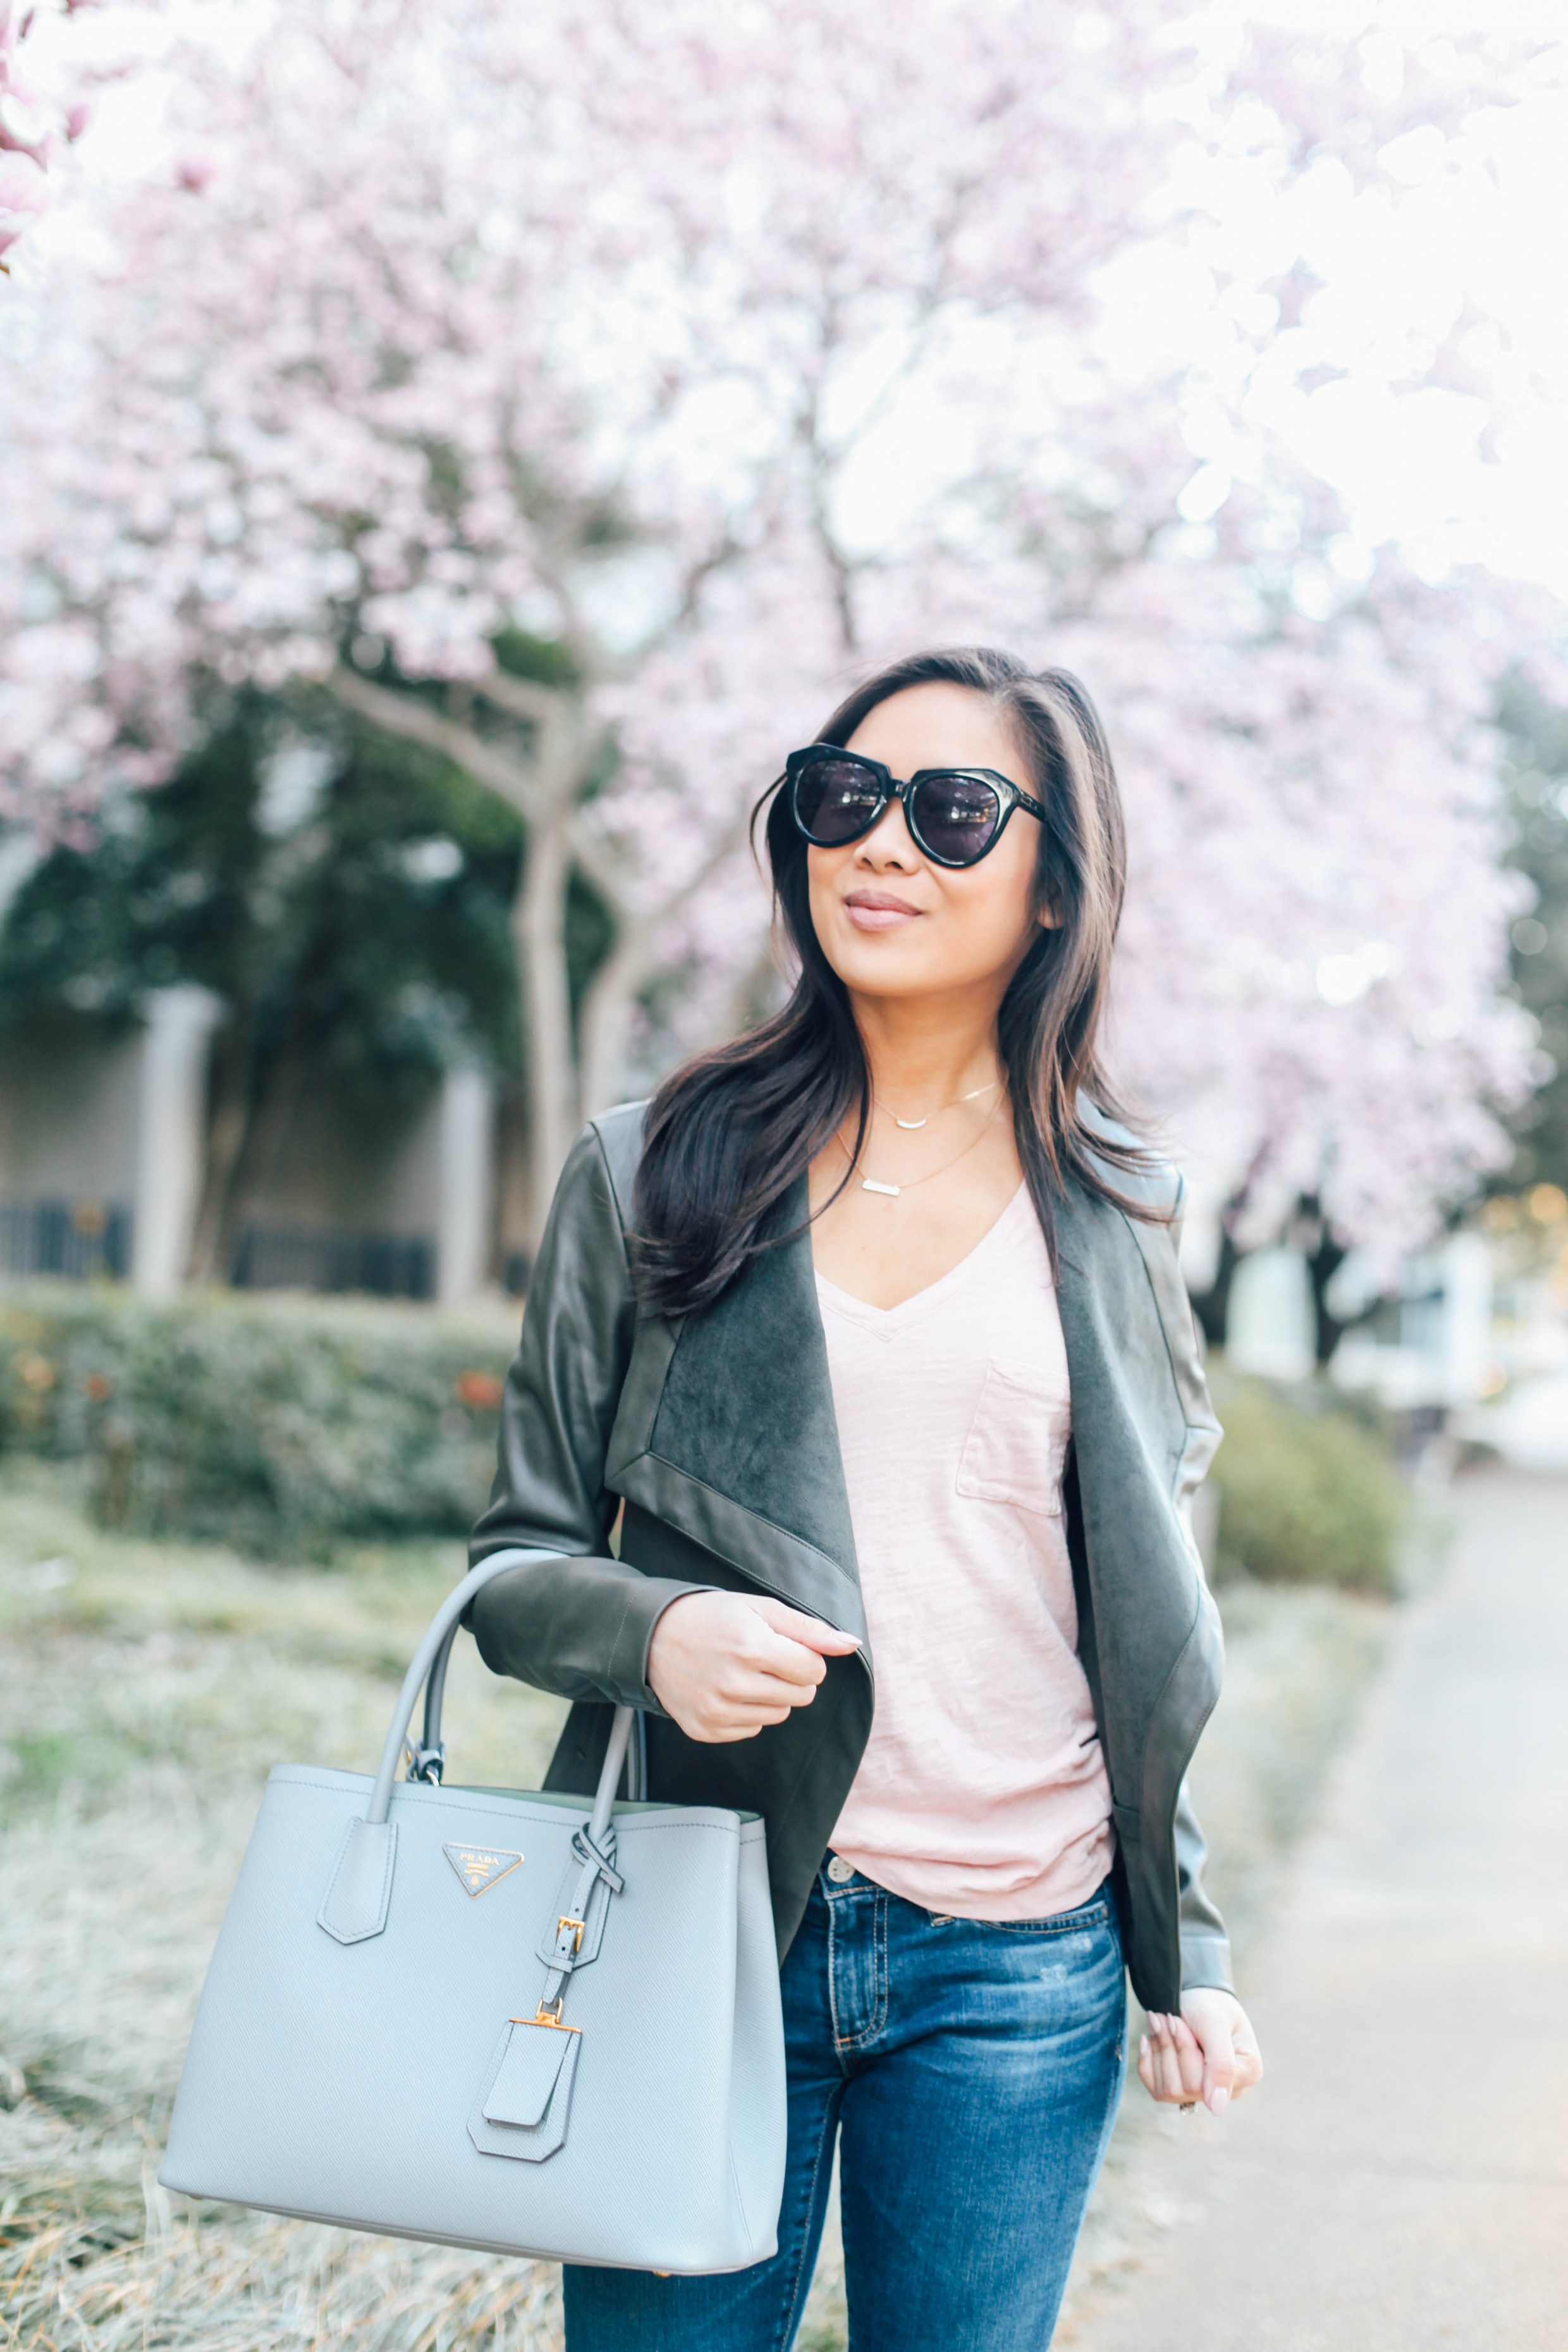 Blogger Hoang-Kim shares her tips for styling wardrobe basics for spring, including a leather jacket, tee and jeans